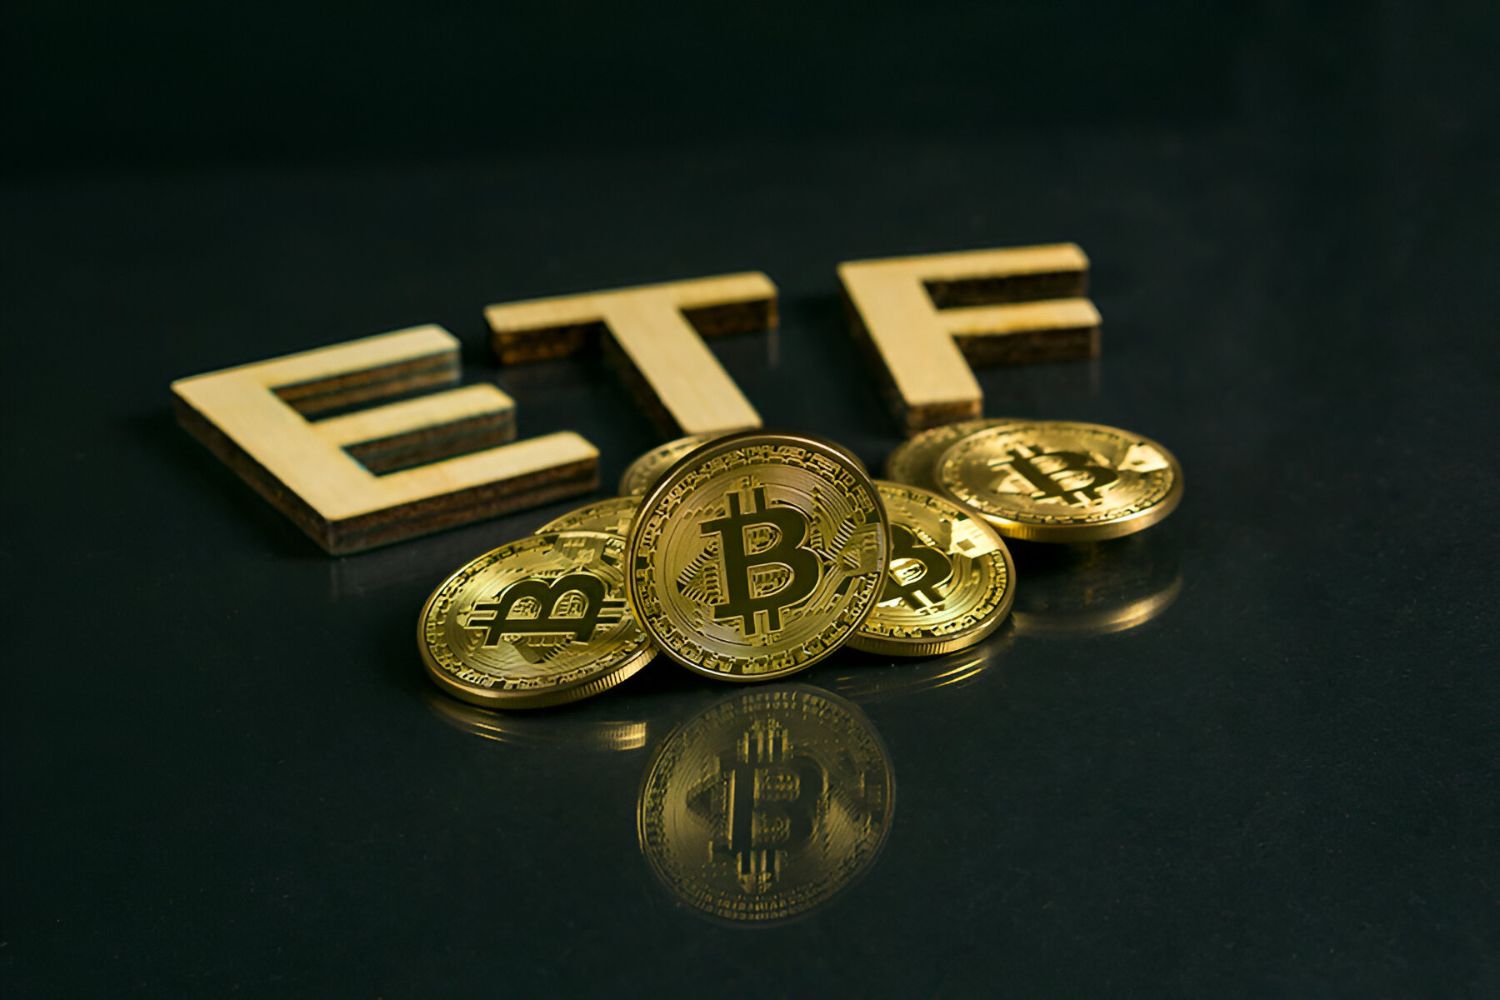 what-is-bitcoin-etf